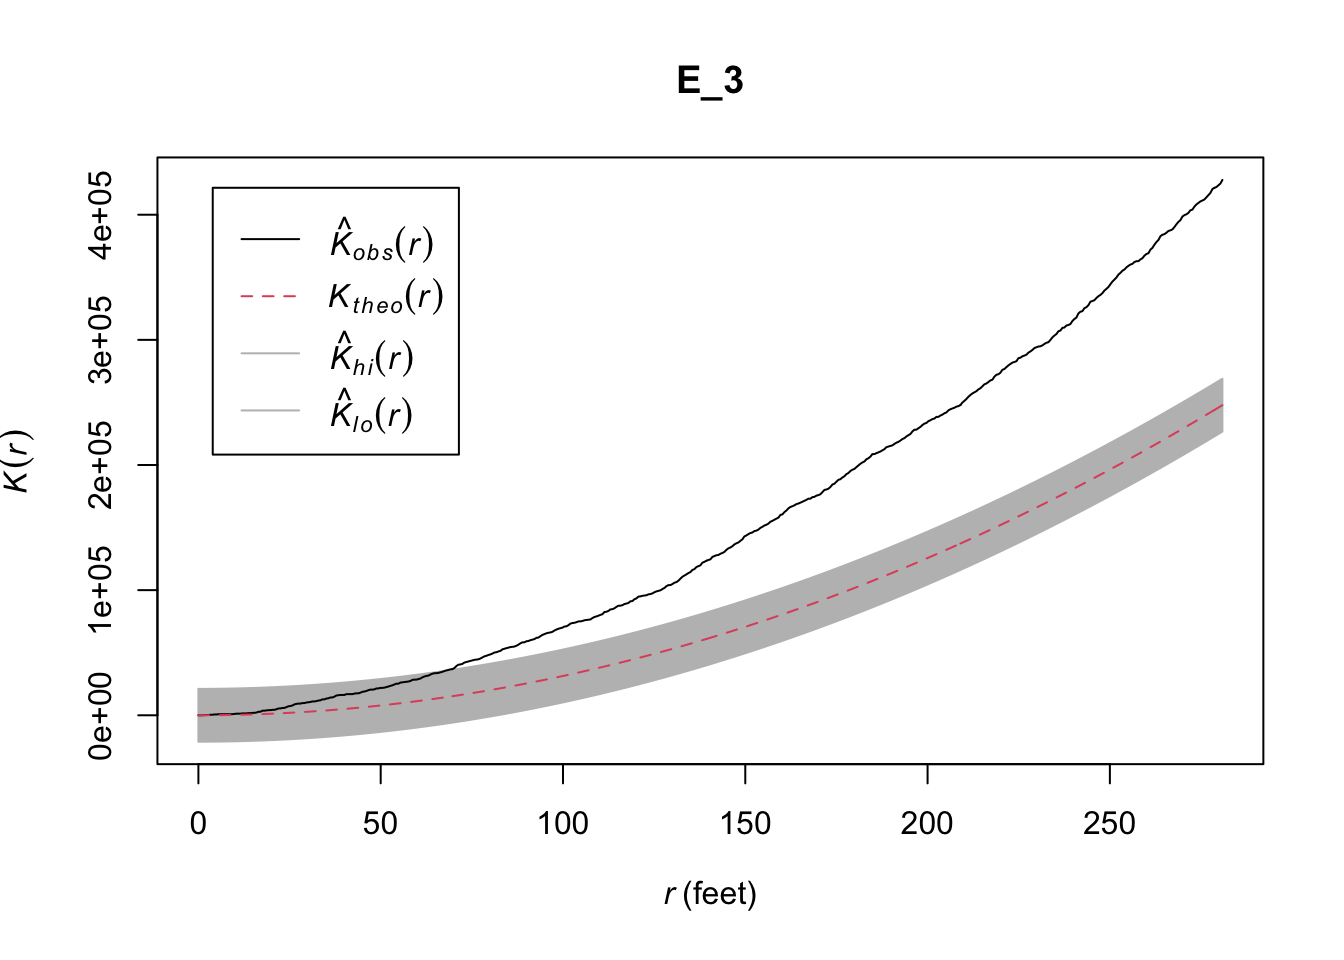 Another plot similar to the two previous ones with envelopes, we have 'K of r' against 'r in feet' this time, up to three hundred. 'K hat obs of r' climbs much faster than 'K theo of r', and exist the envelope after about seventy feet.